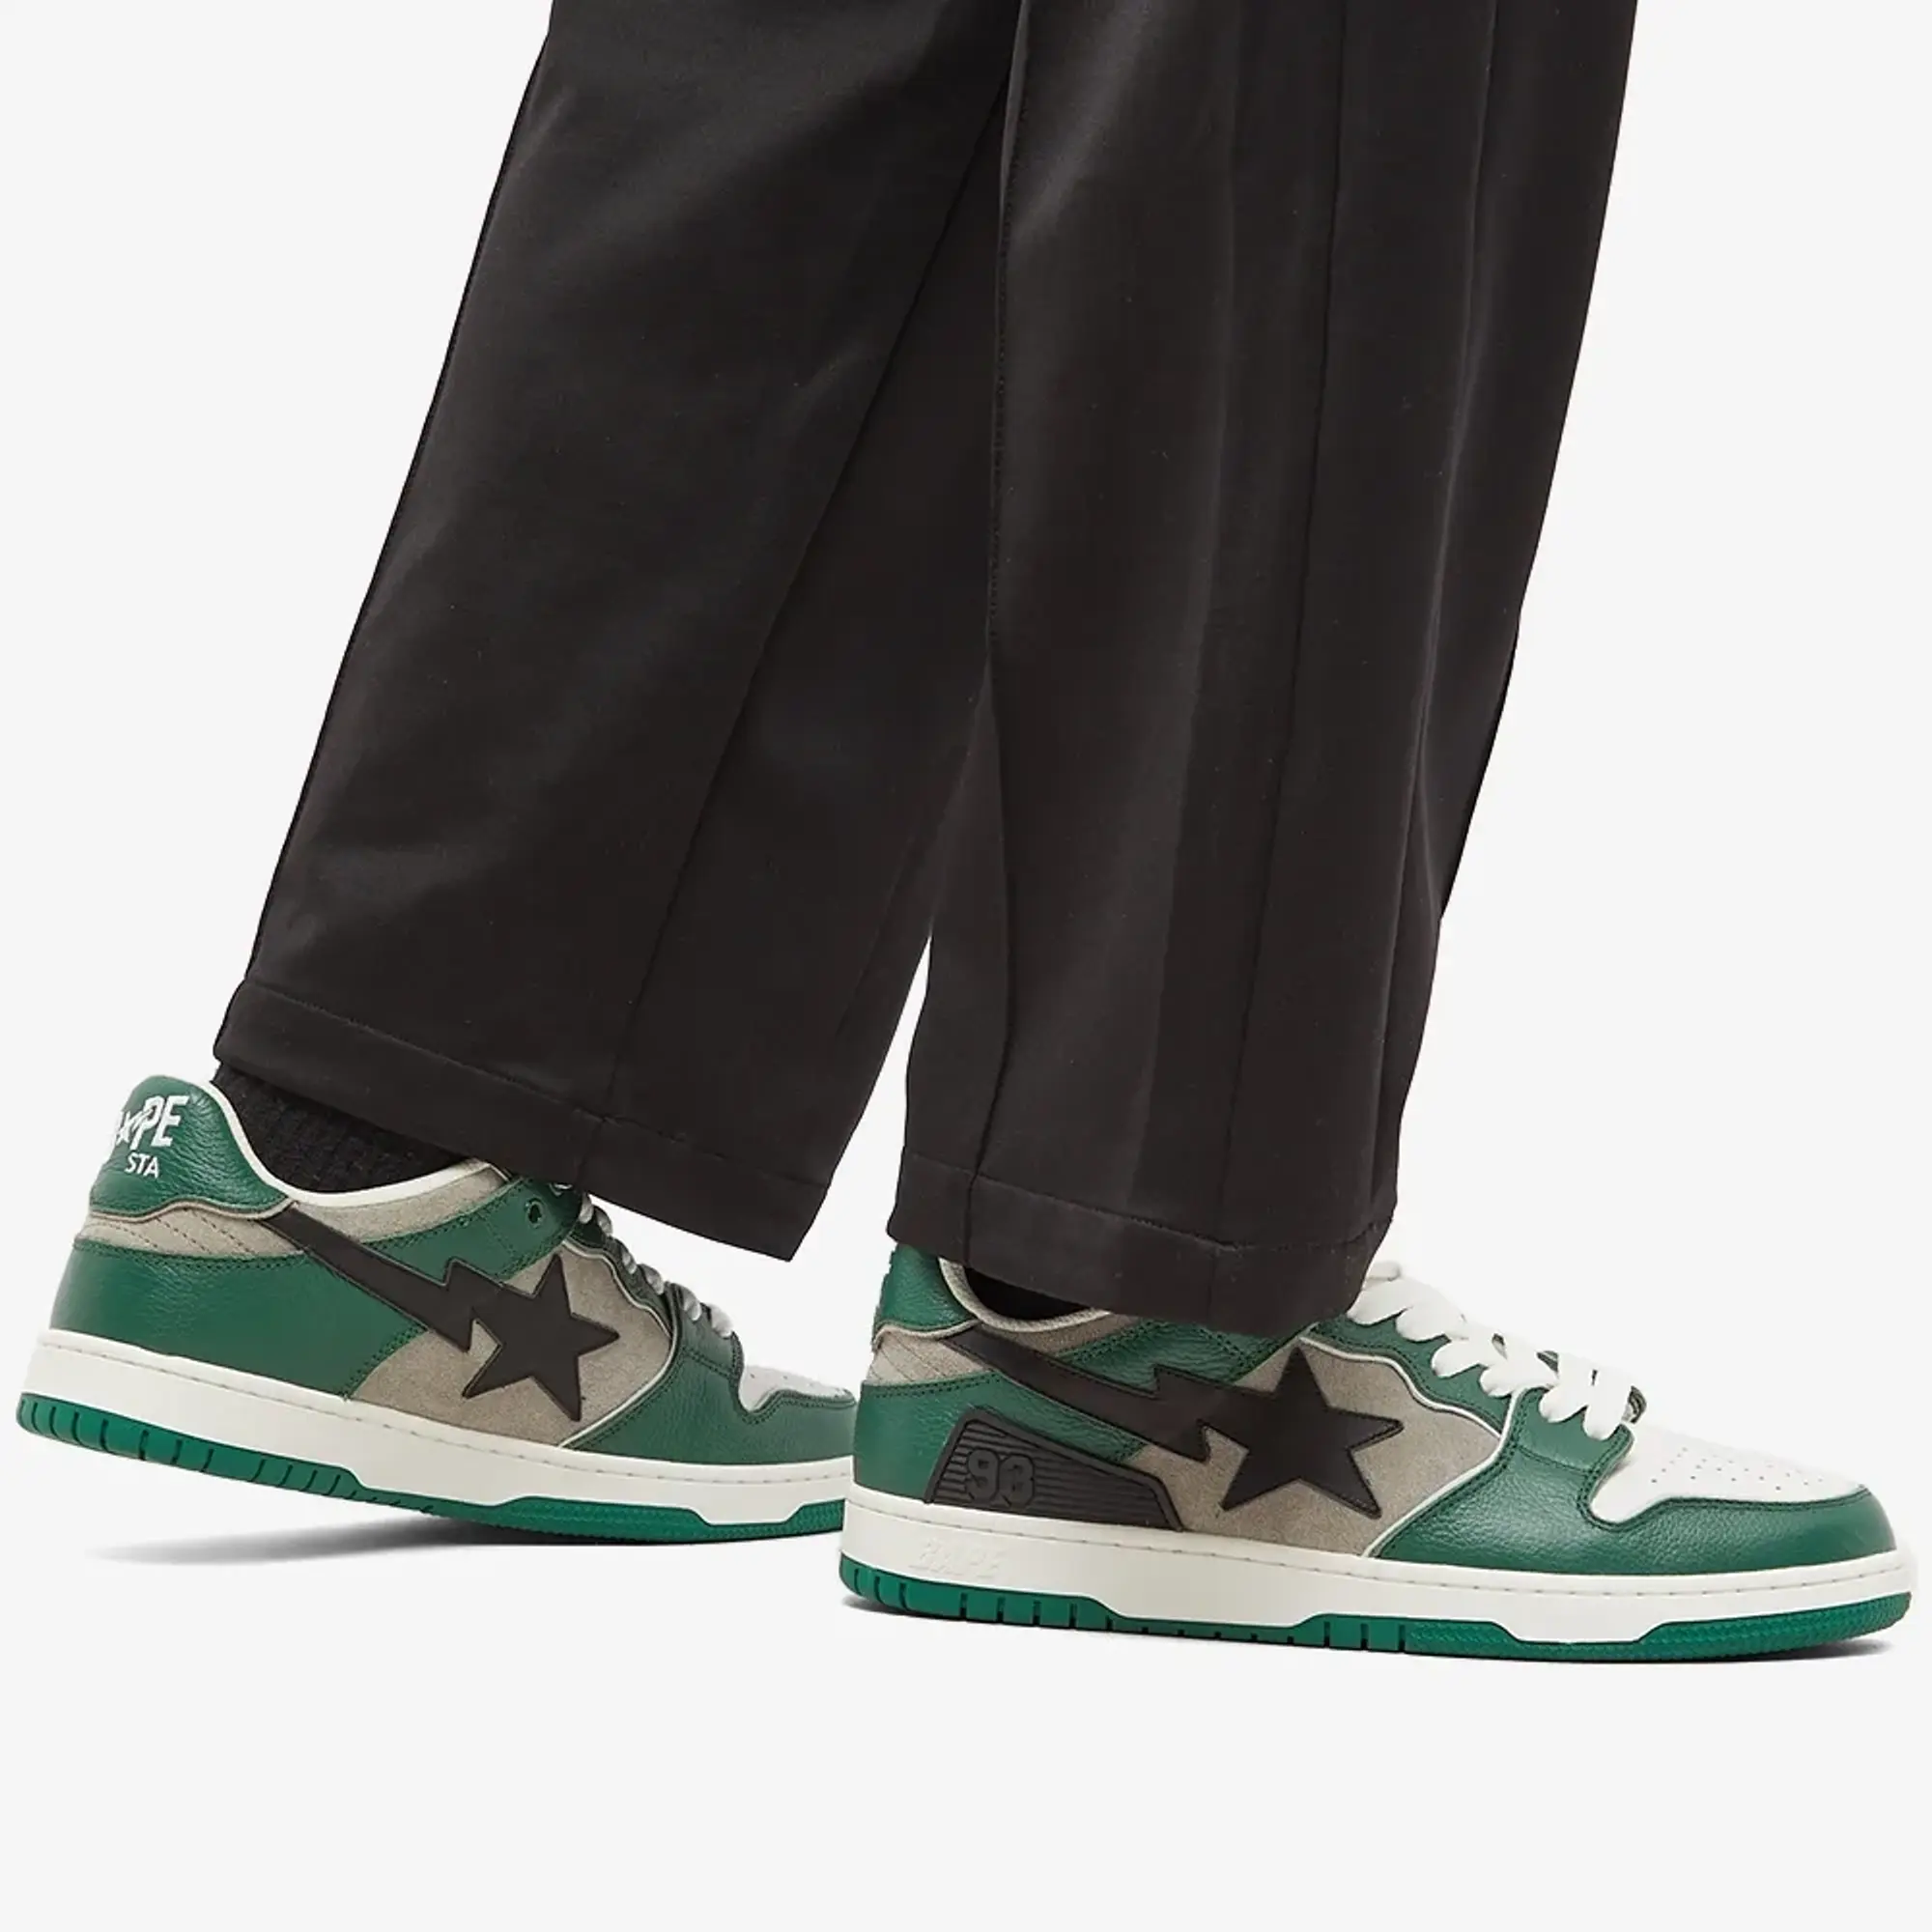 A BATHING APE® SK8 STA #1 M2 Green Shoes